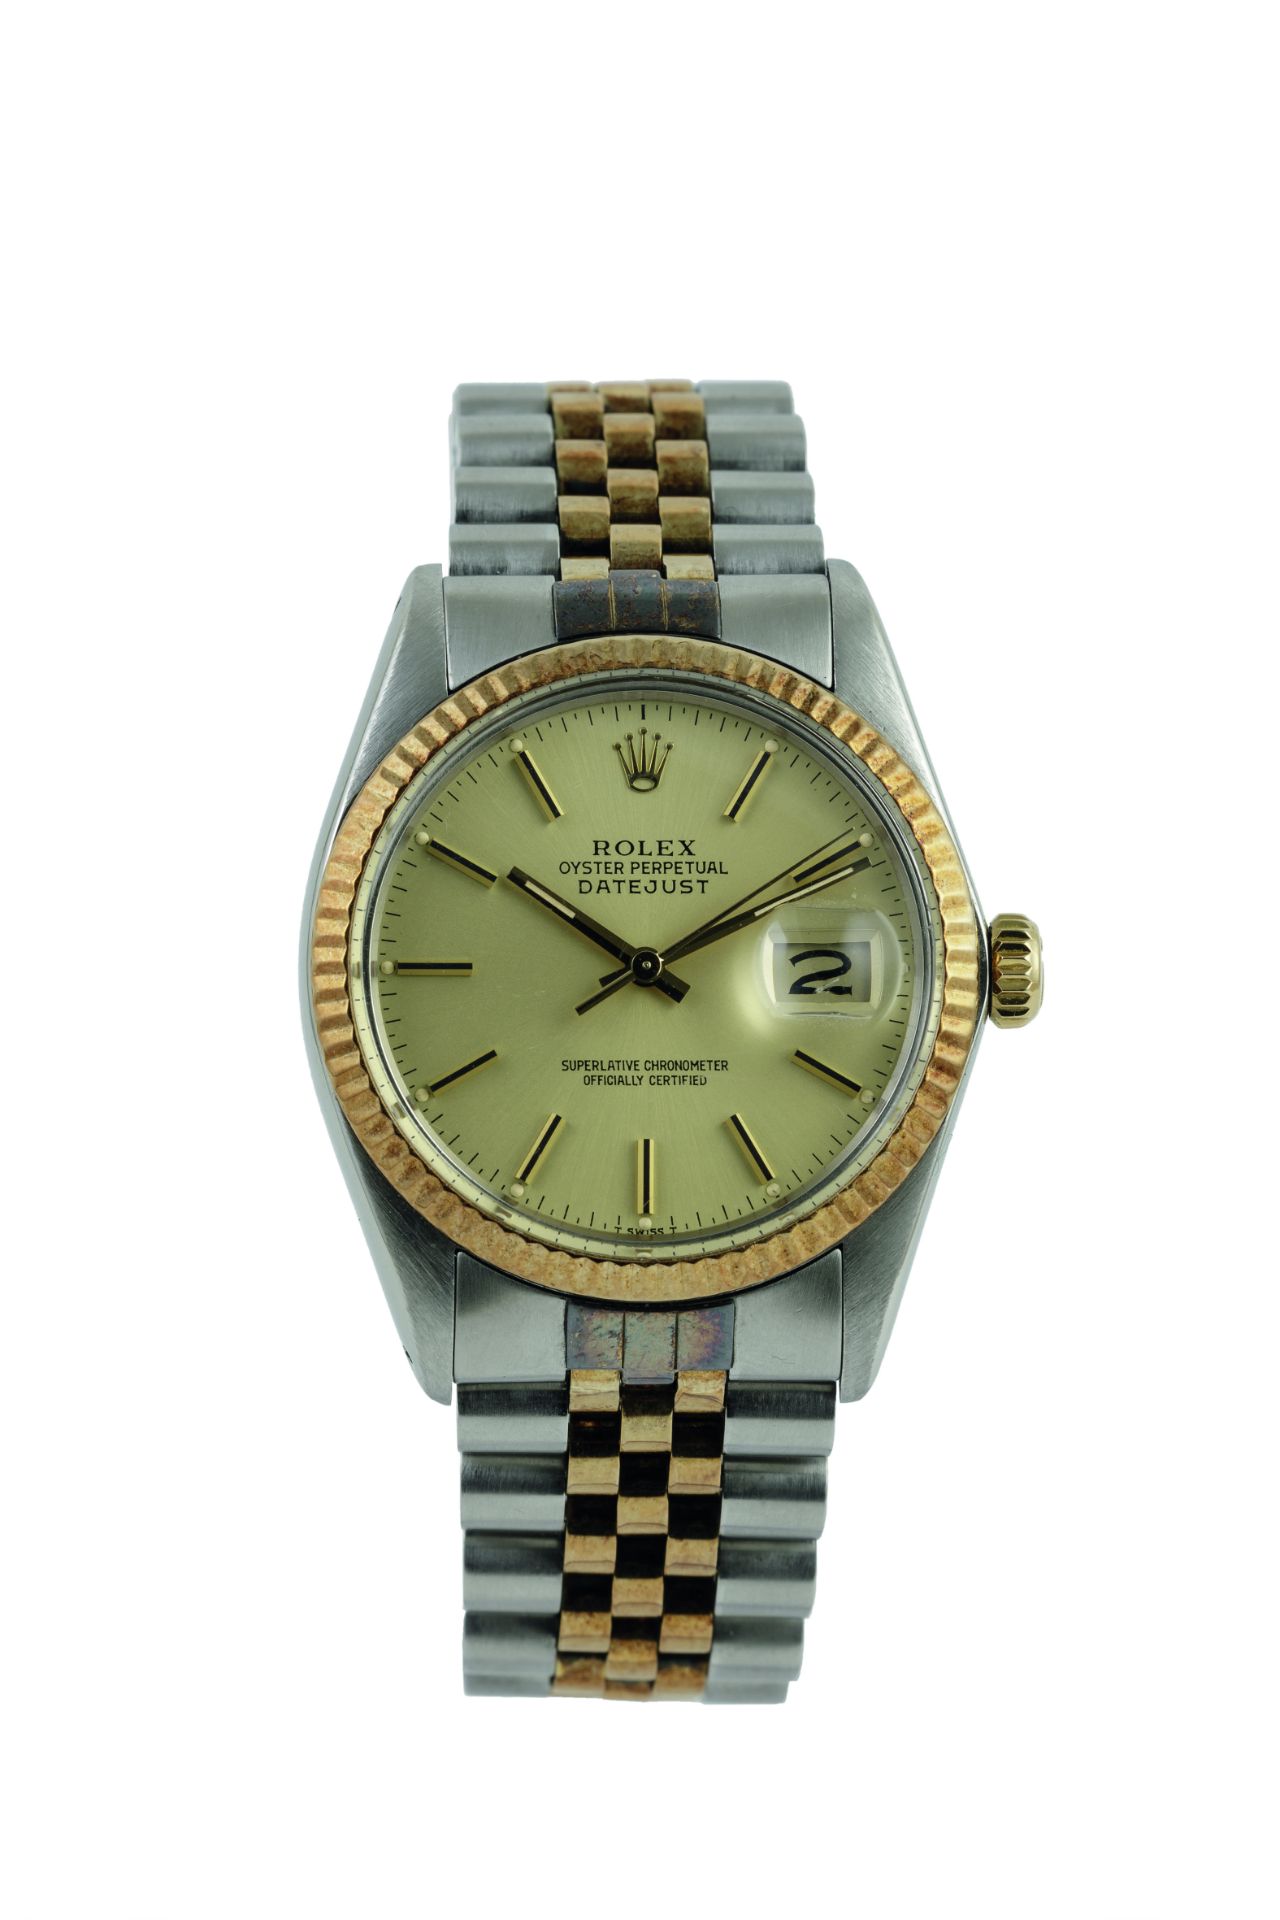 ROLEX OYSTER PERPETUAL DATEJUST REF 16013 - VERS 1979